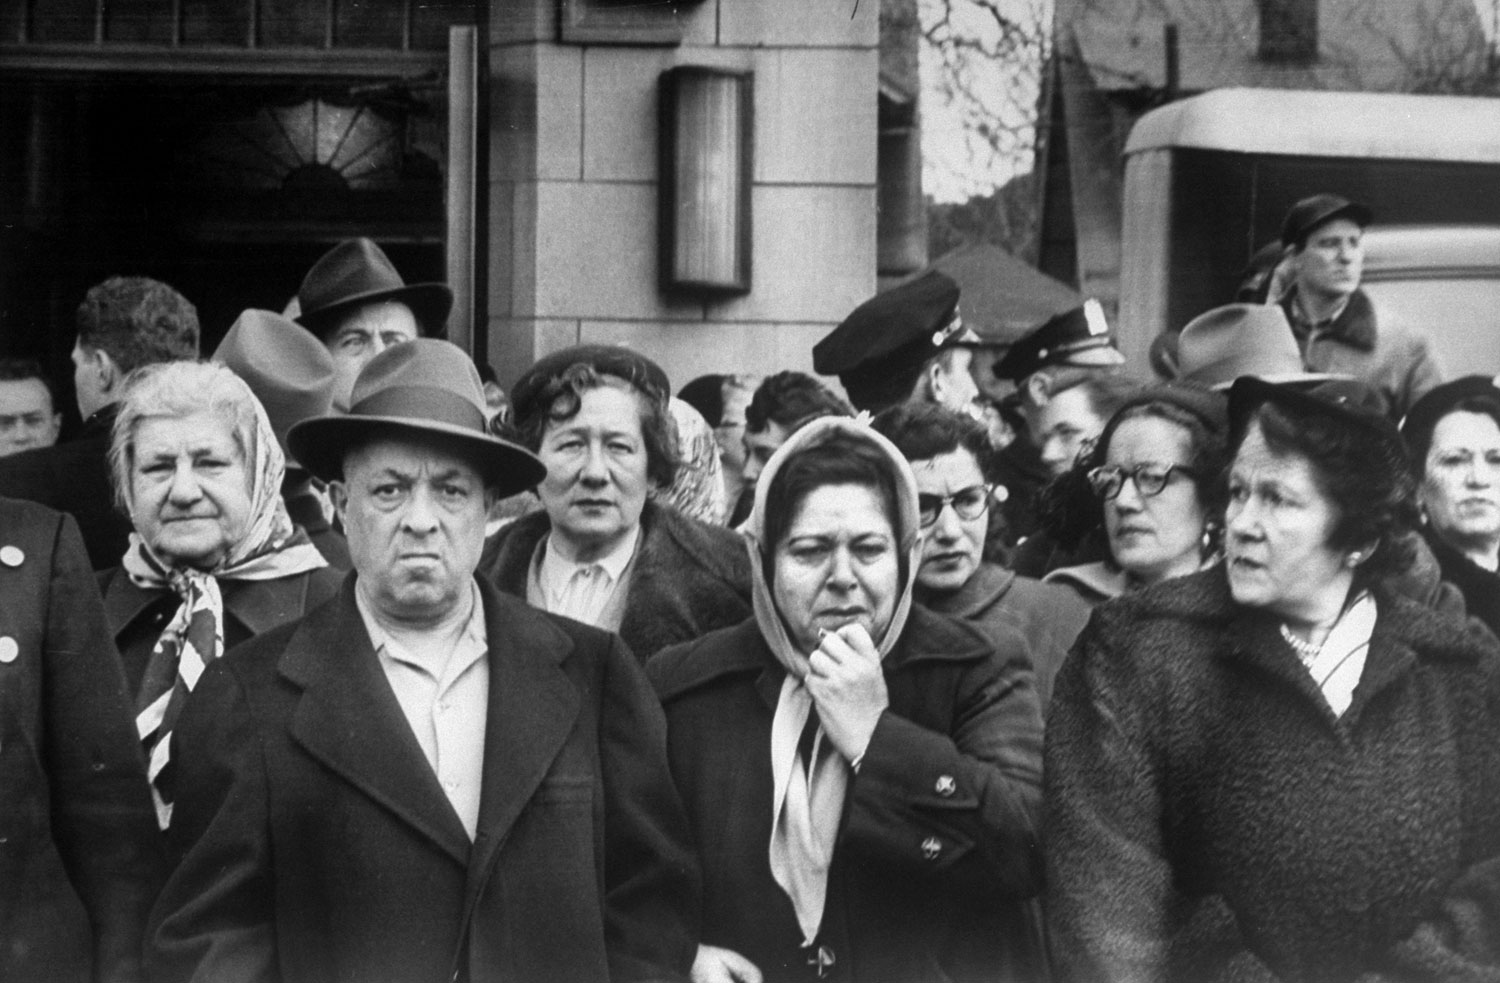 Shocked neighbors line the street waiting for Arnold Schuster's casket to be carried from funeral home, New York, 1952. Schuster, an amateur detective, was instrumental in the capture of bank robber Willie Sutton, and was murdered by members of the Gambino crime family.